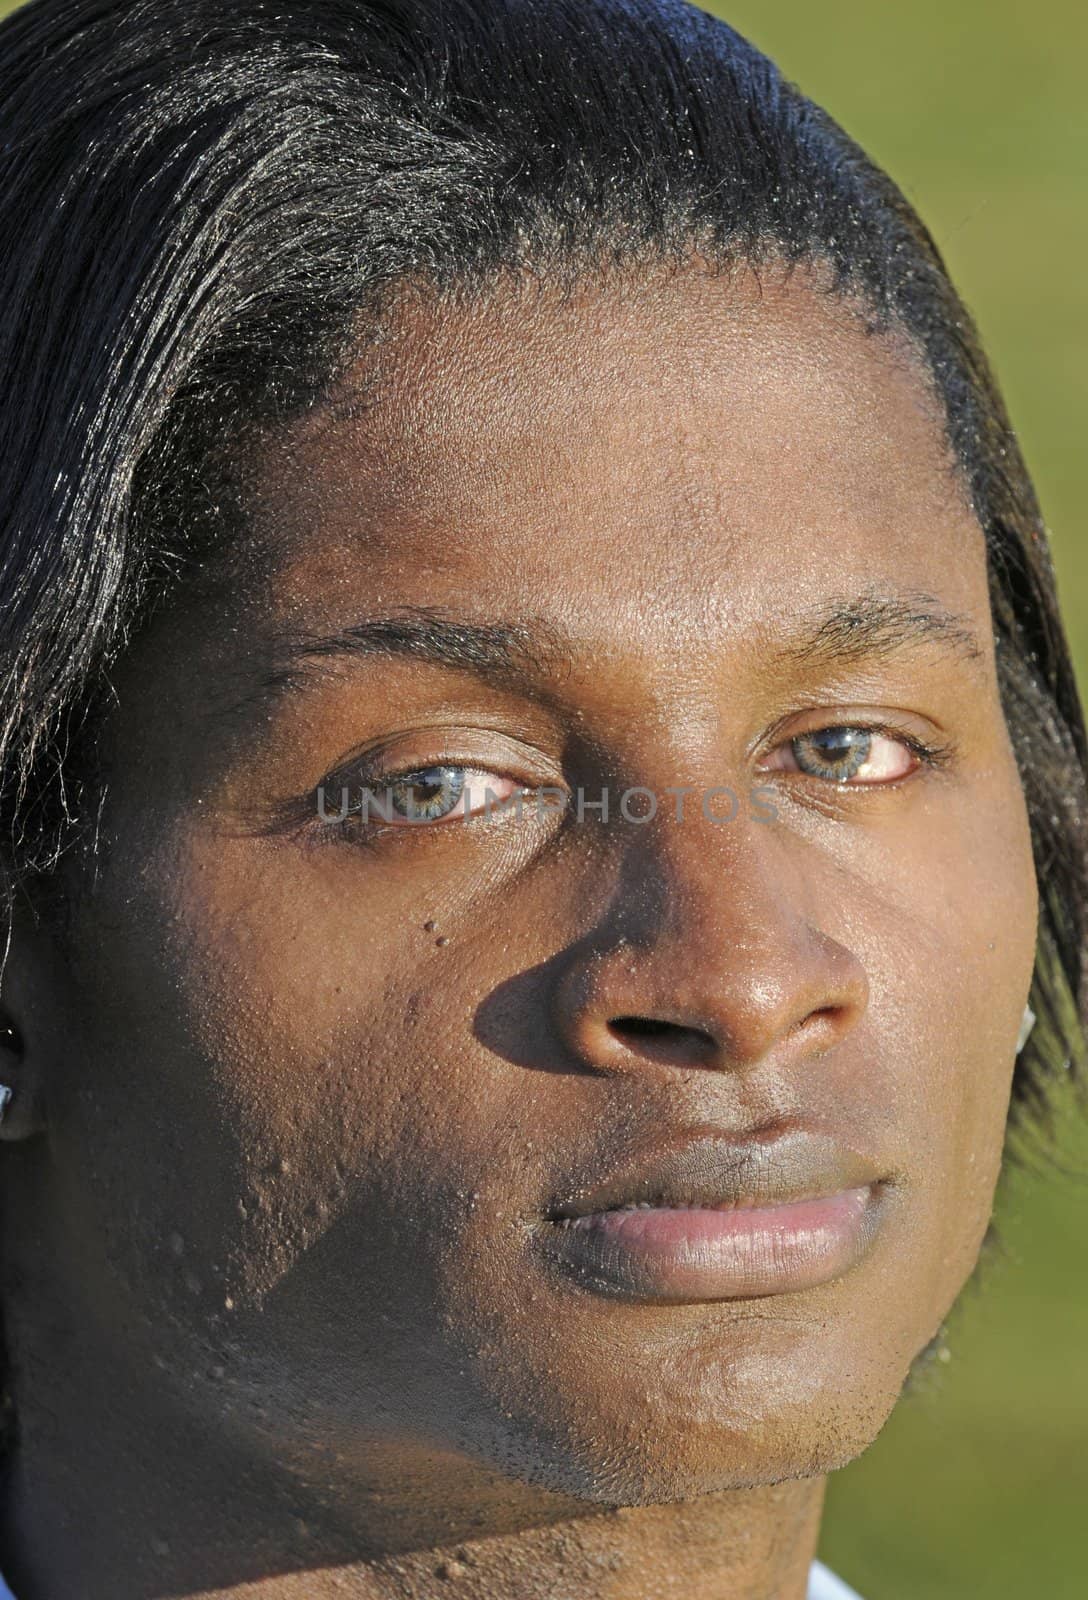 closeup of a young African American man with bloodshot eyes from allergies